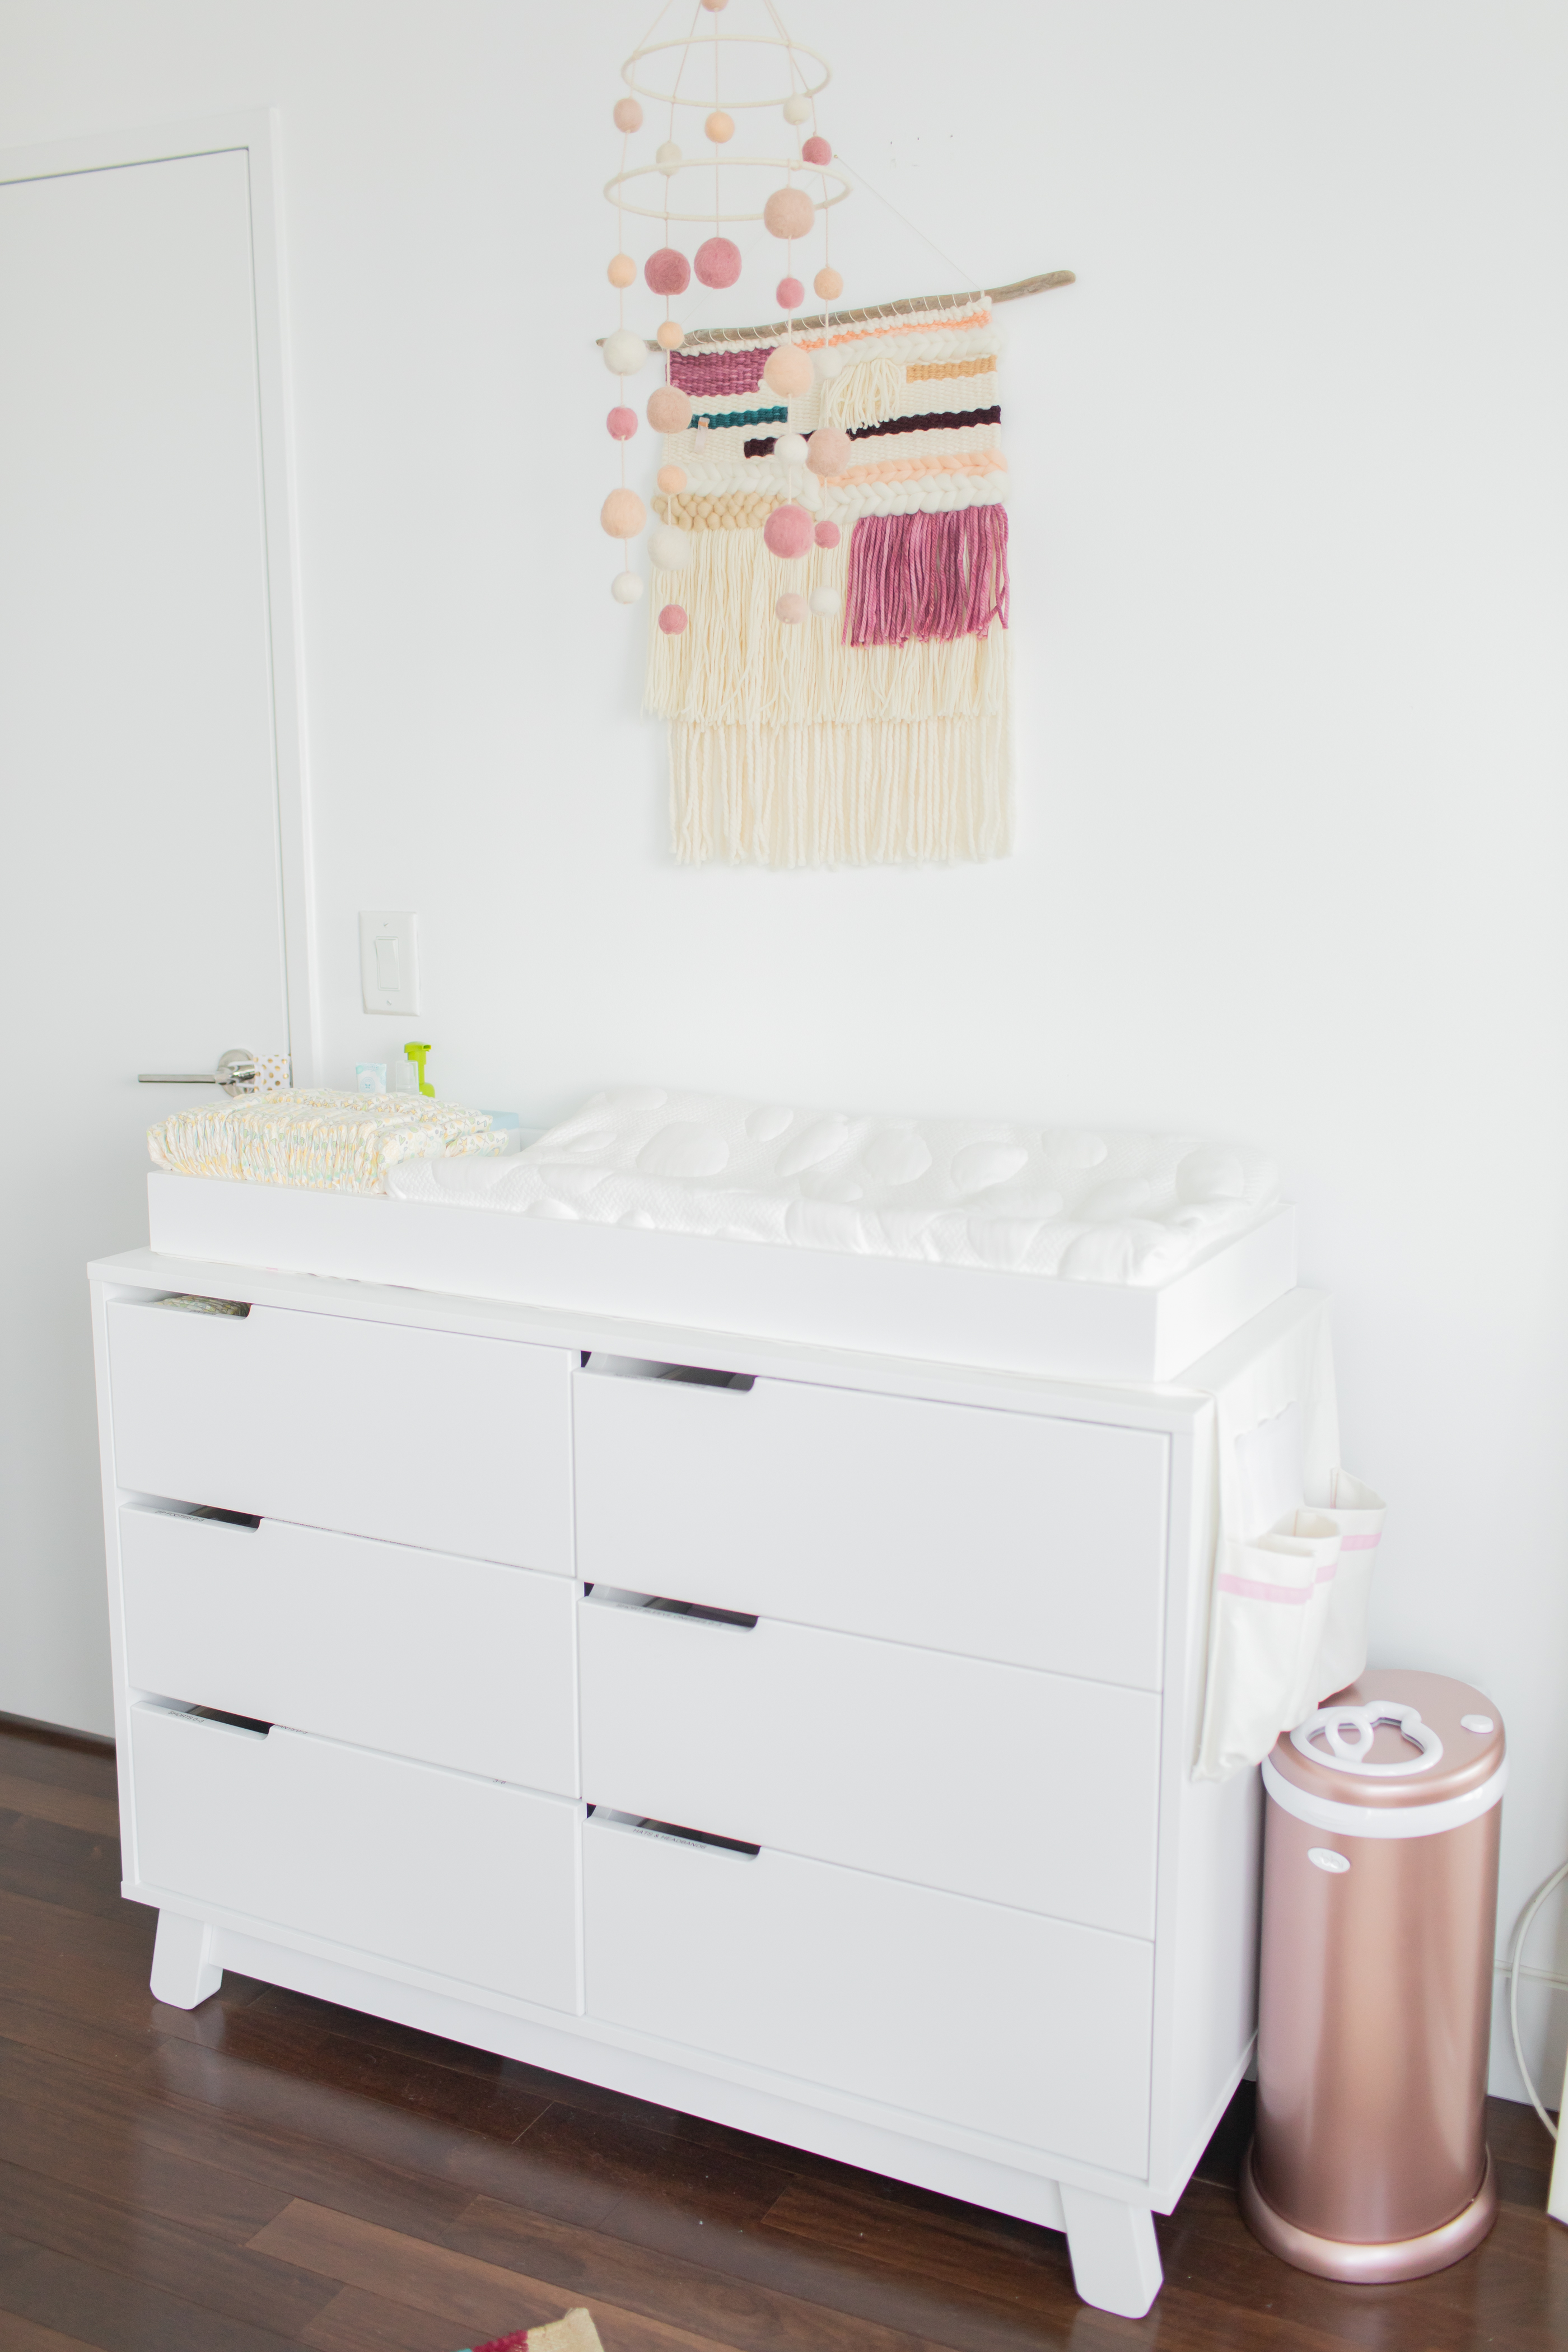 Baby Girl's Nursery Reveal and How We Fit A Nursery Into Our Bedroom